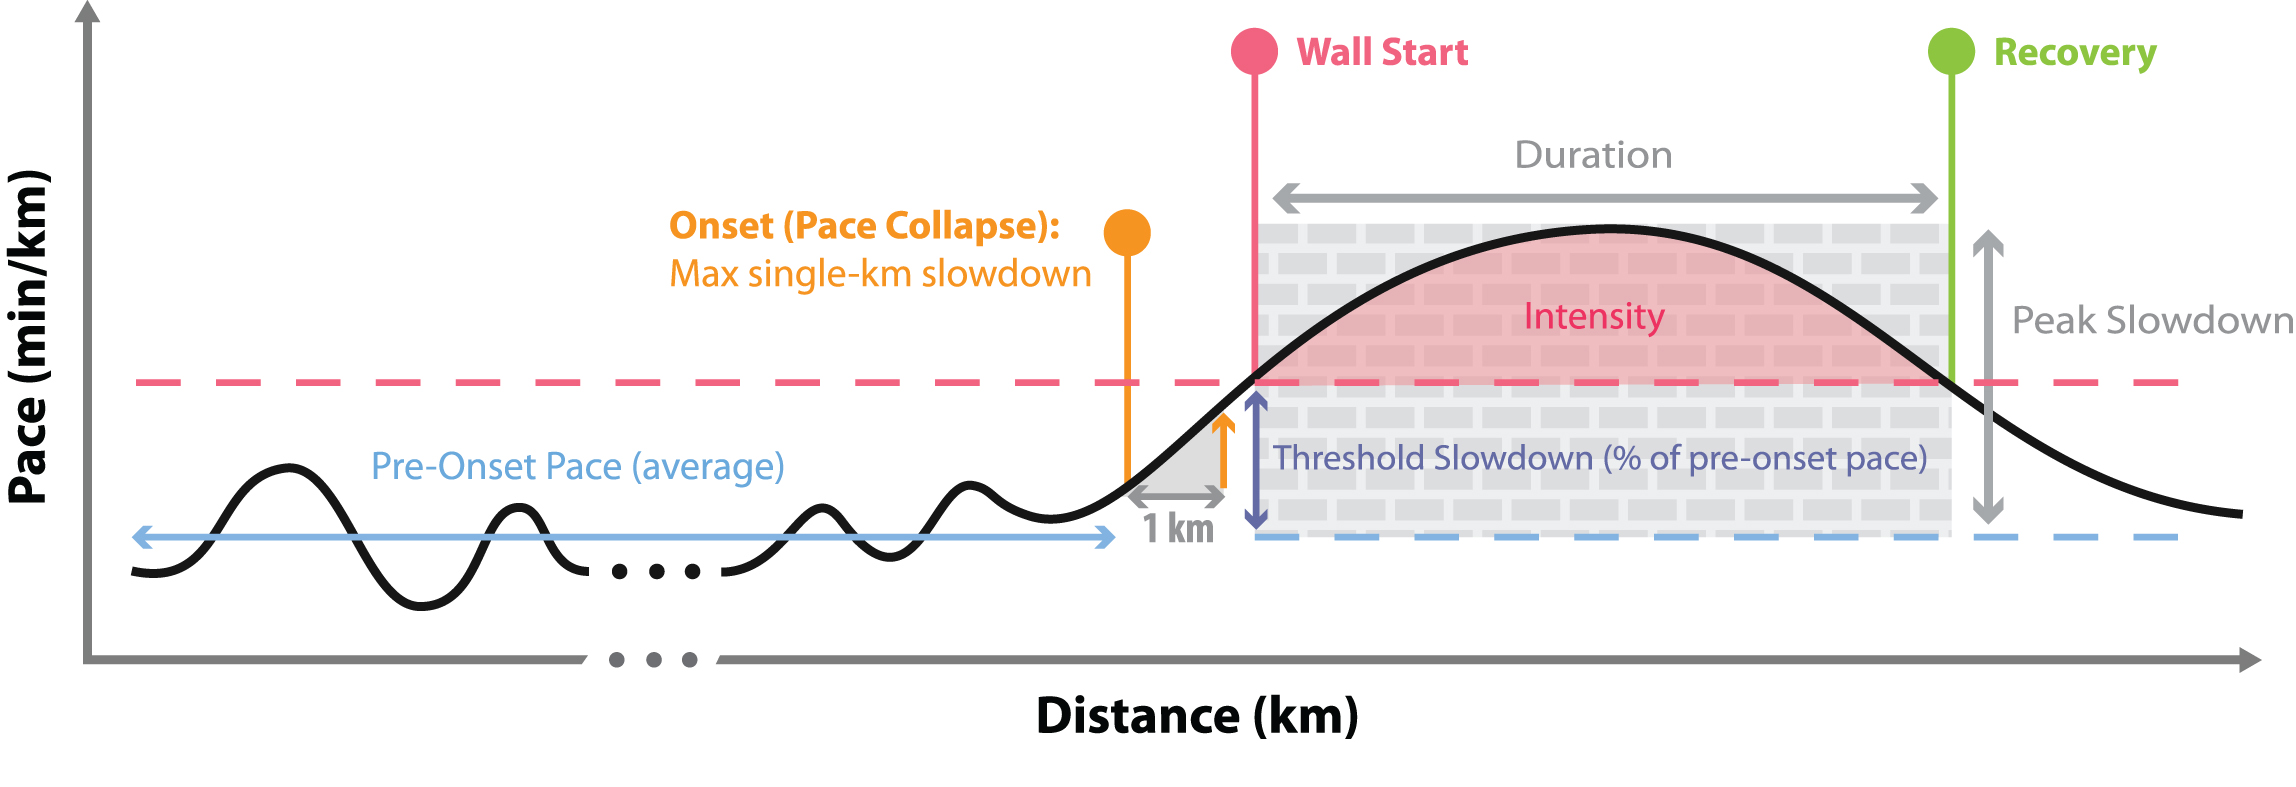 Our model of the wall is based on a number of basic features: the onset, the pace collapse, the peak, and the duration.